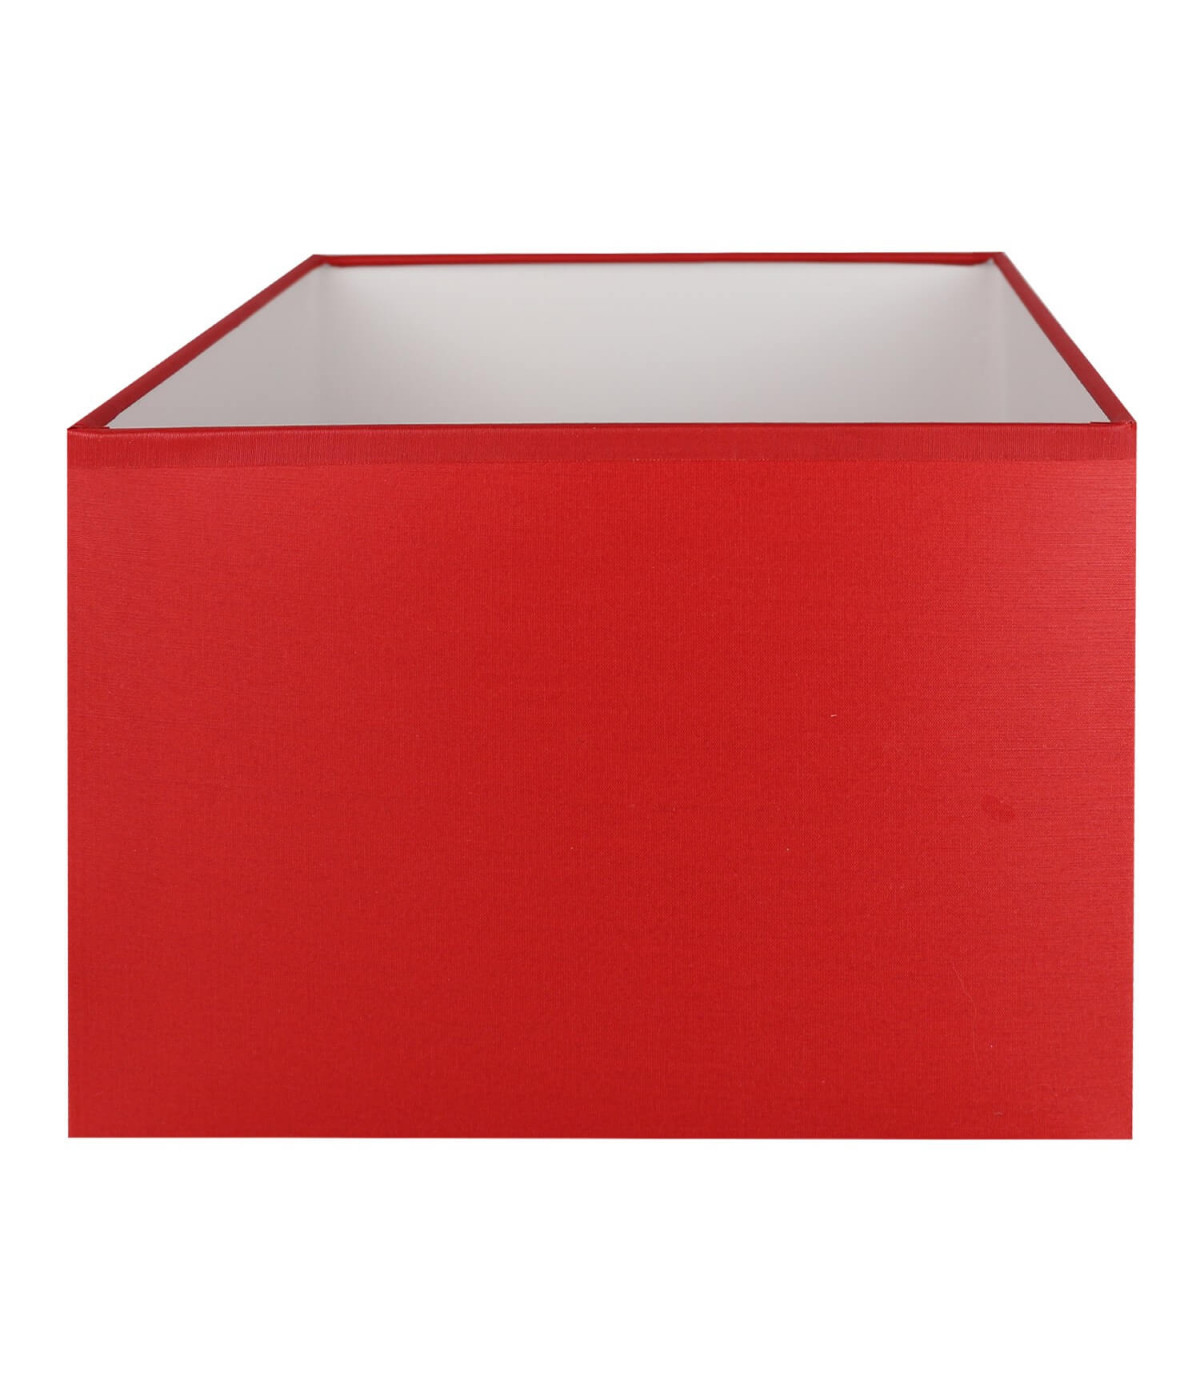 Red rectangle shade